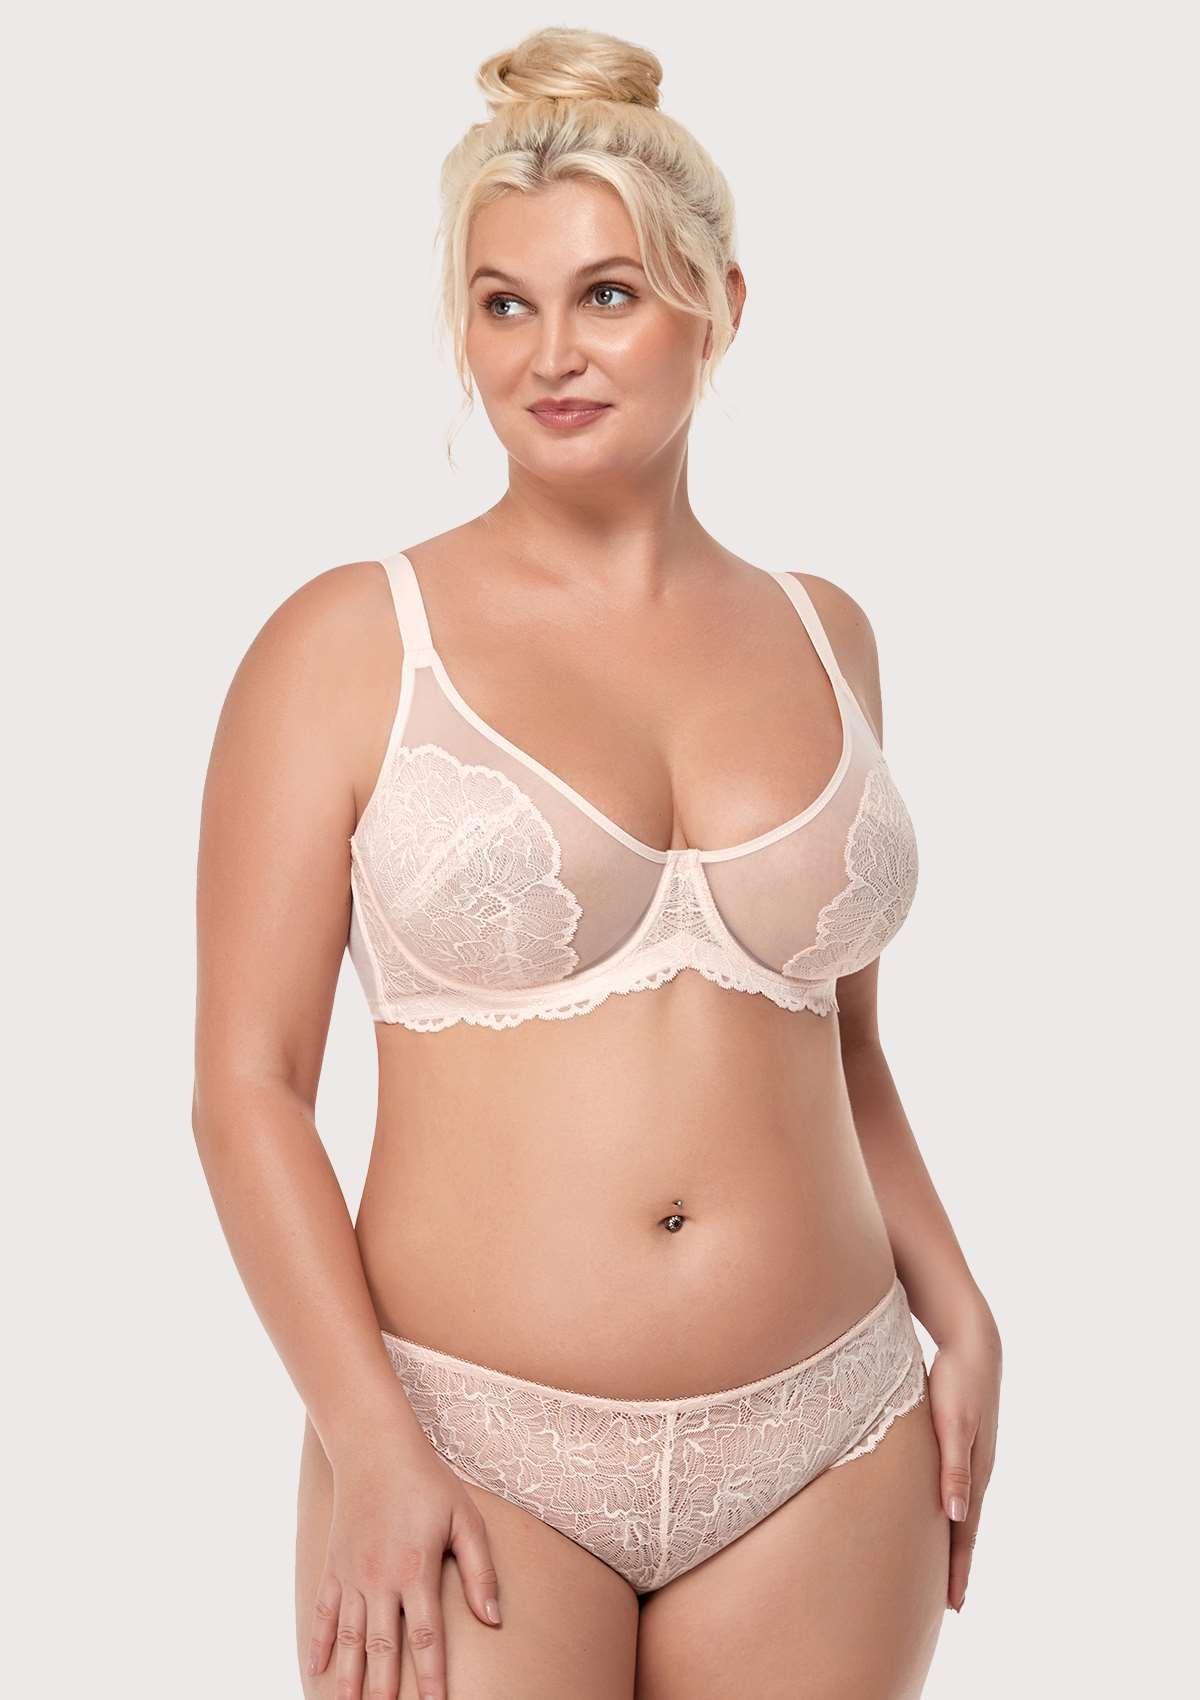 HSIA Blossom Matching Lacey Underwear And Bra Set: Sexy Lace Bra - Dusty Peach / 44 / G